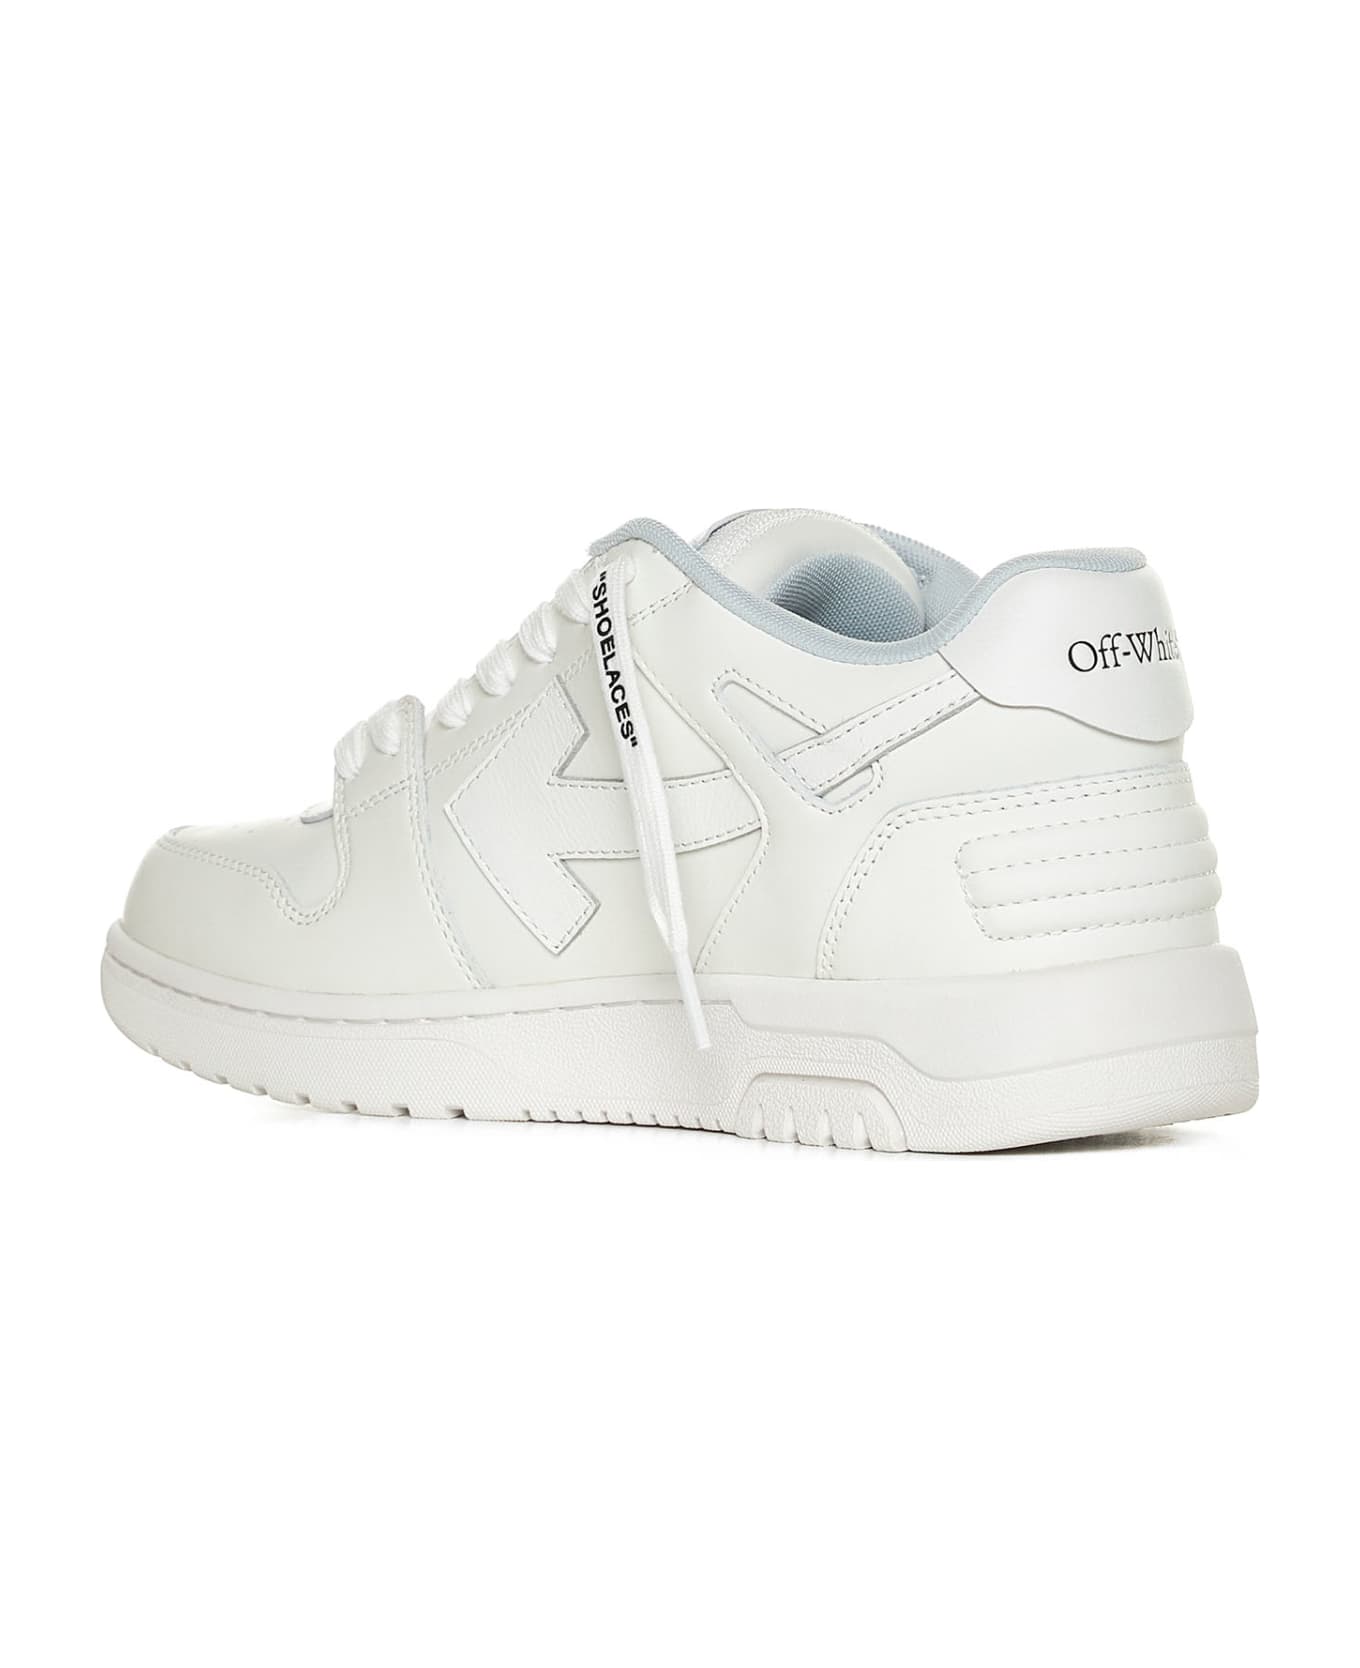 Off-White Out Of Office For Walking Sneakers - White BLACK